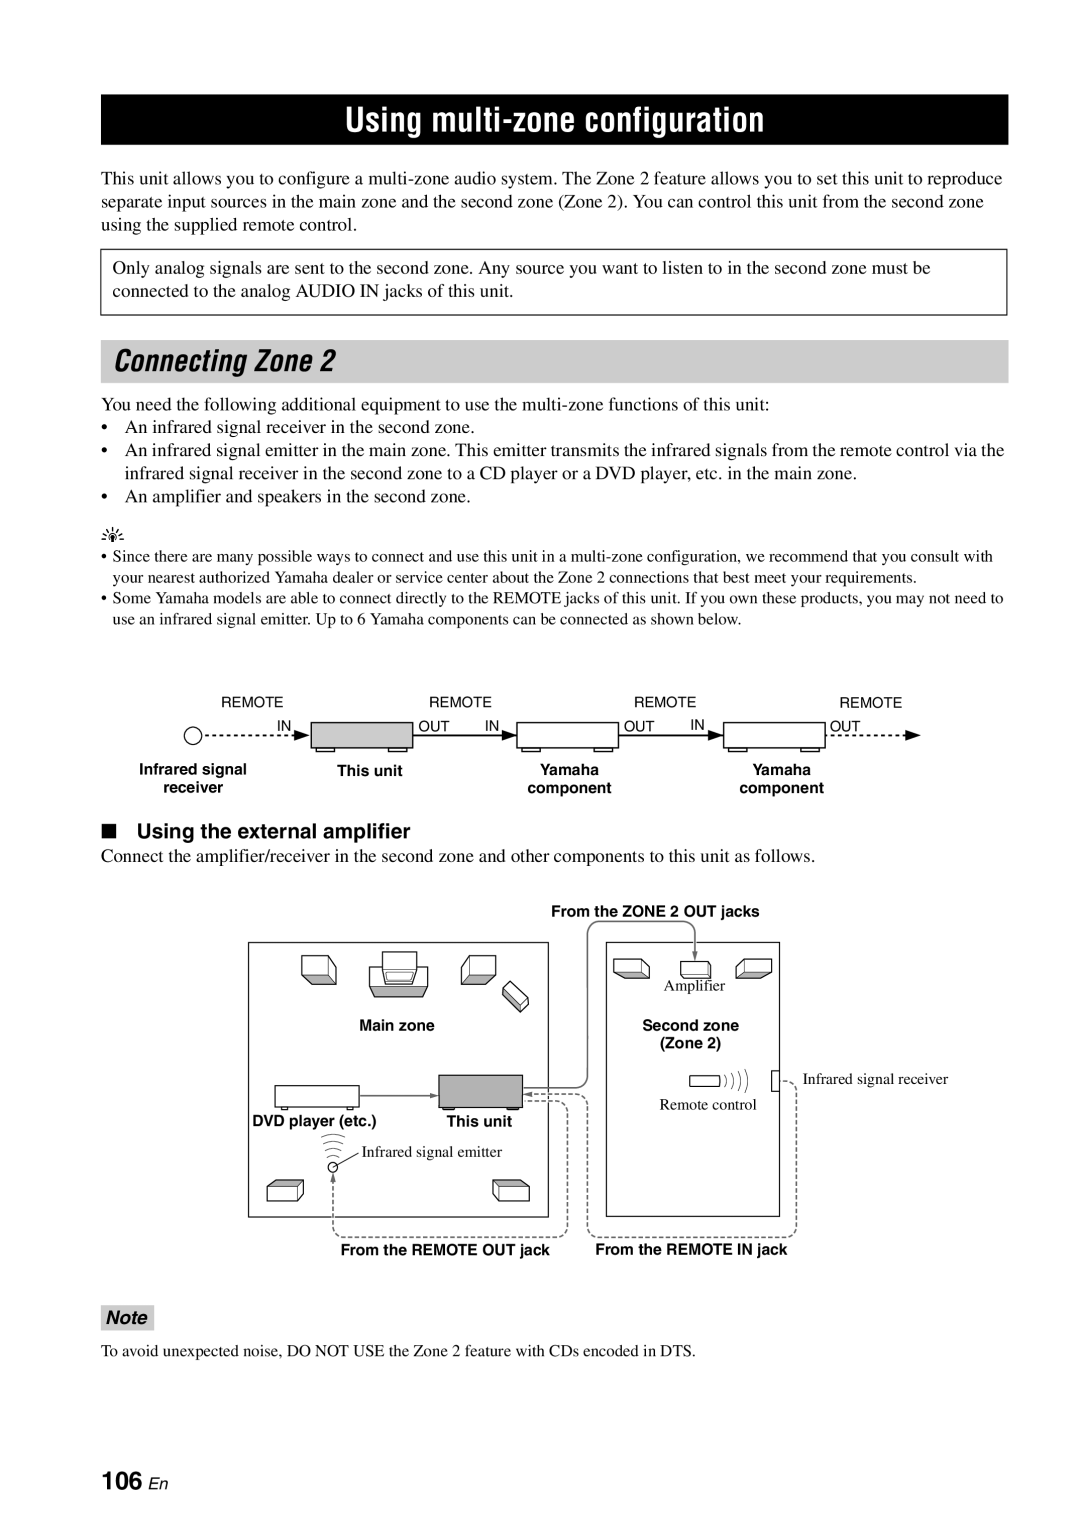 Yamaha HTR-6180 owner manual Using multi-zoneconfiguration, Connecting Zone, 106 En, Using the external amplifier 